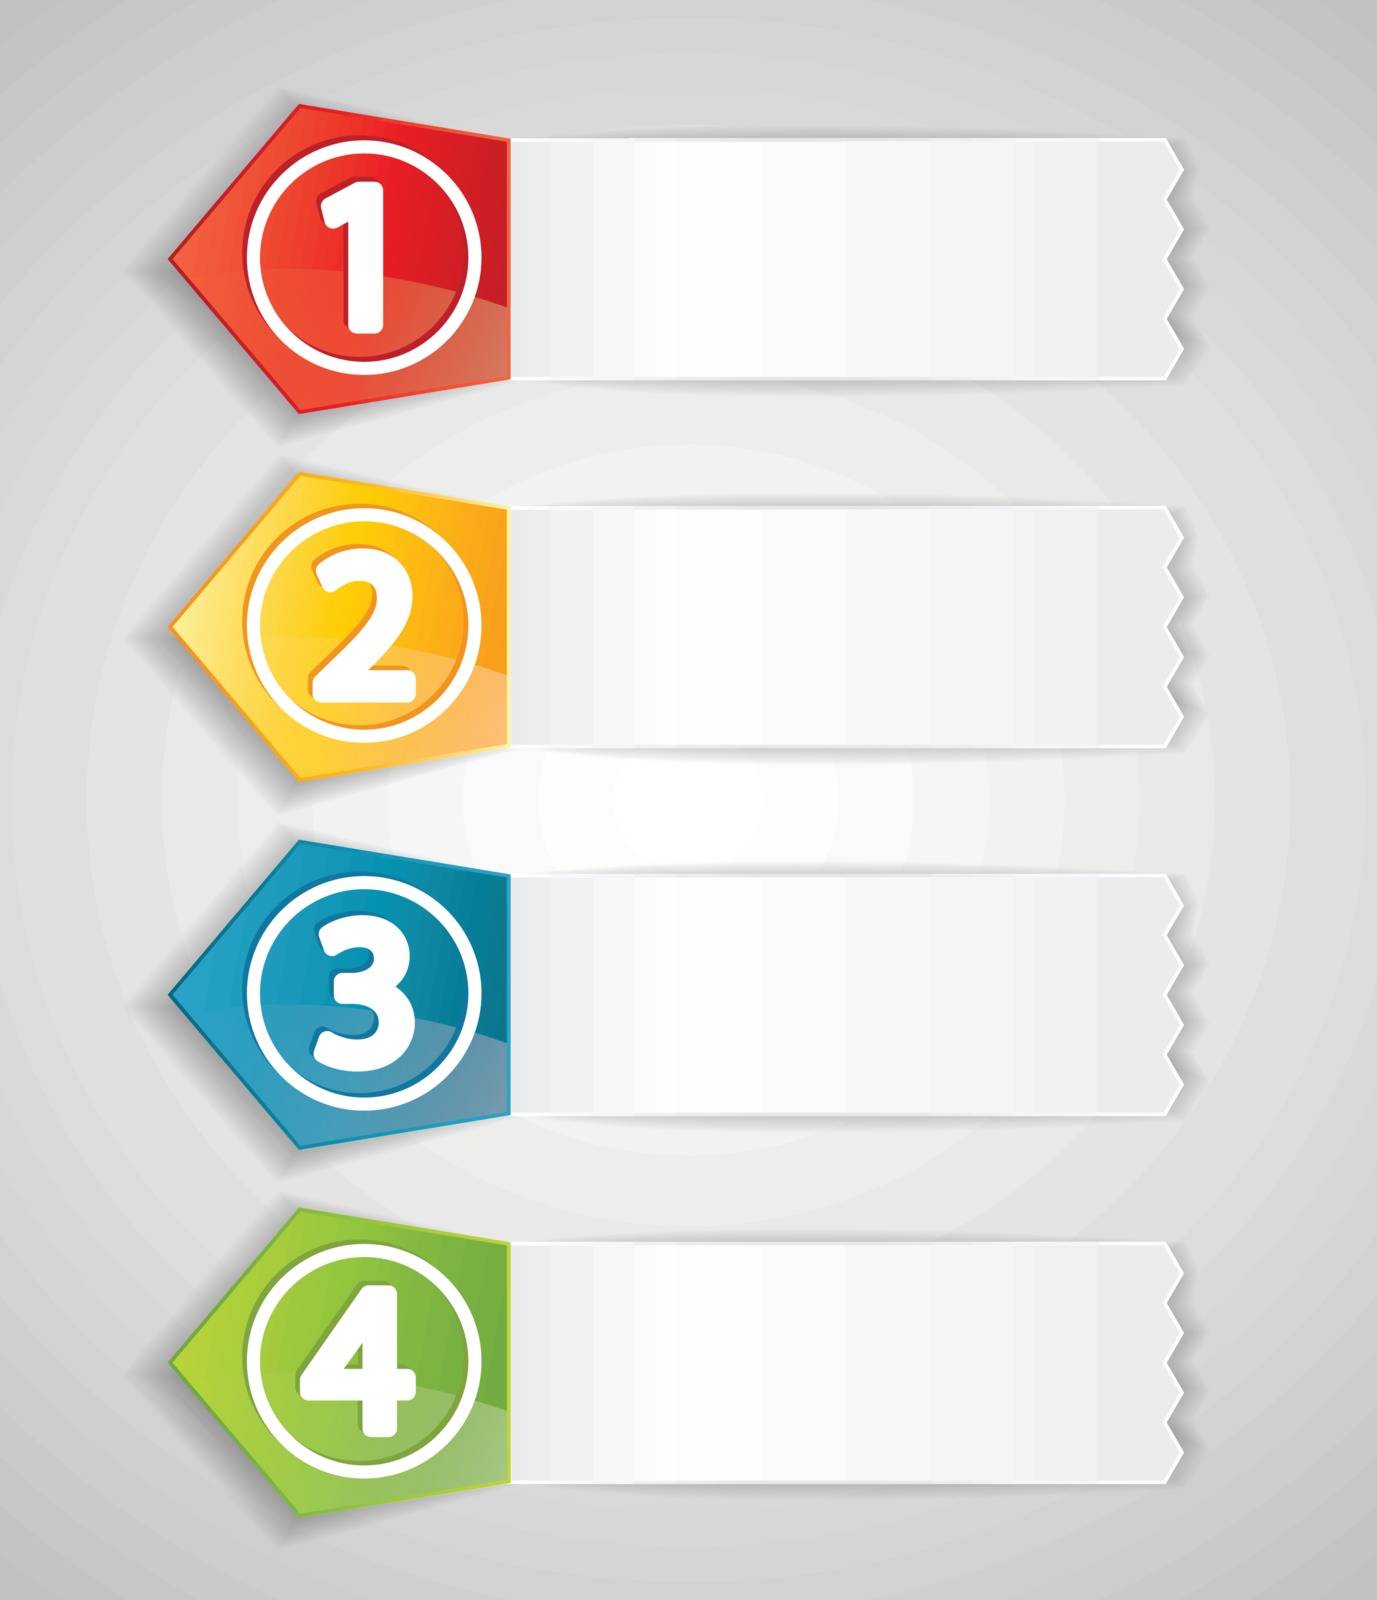 color labels with numbers for various options